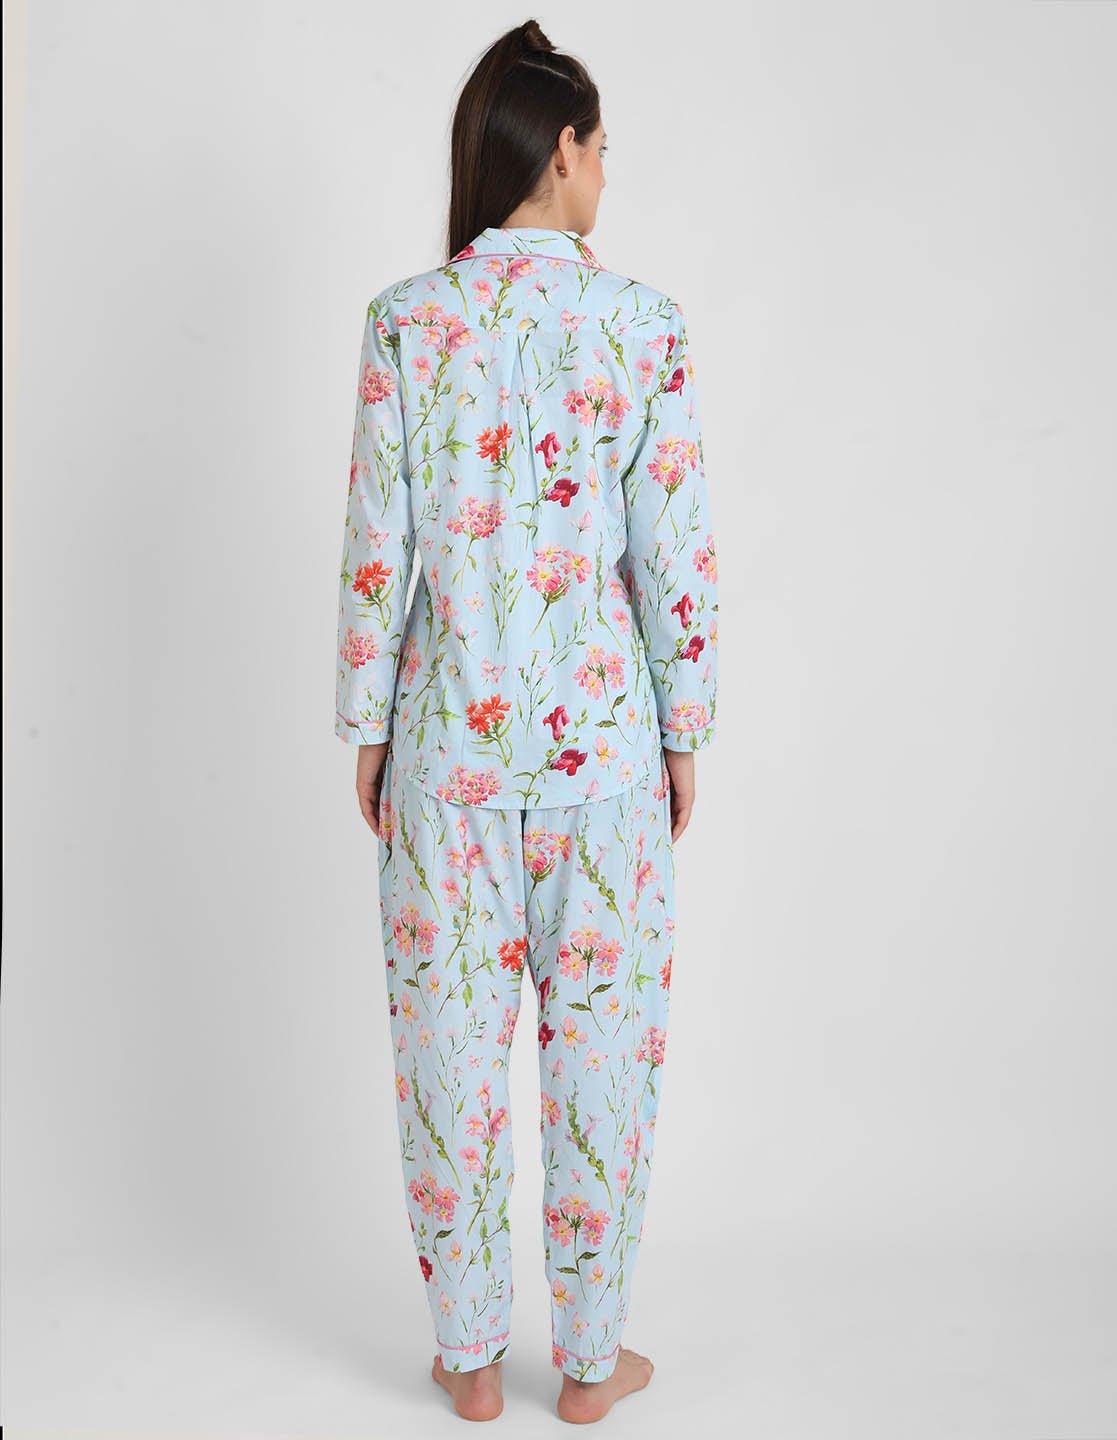 Floral Pink Printed Nightsuit Set for Women